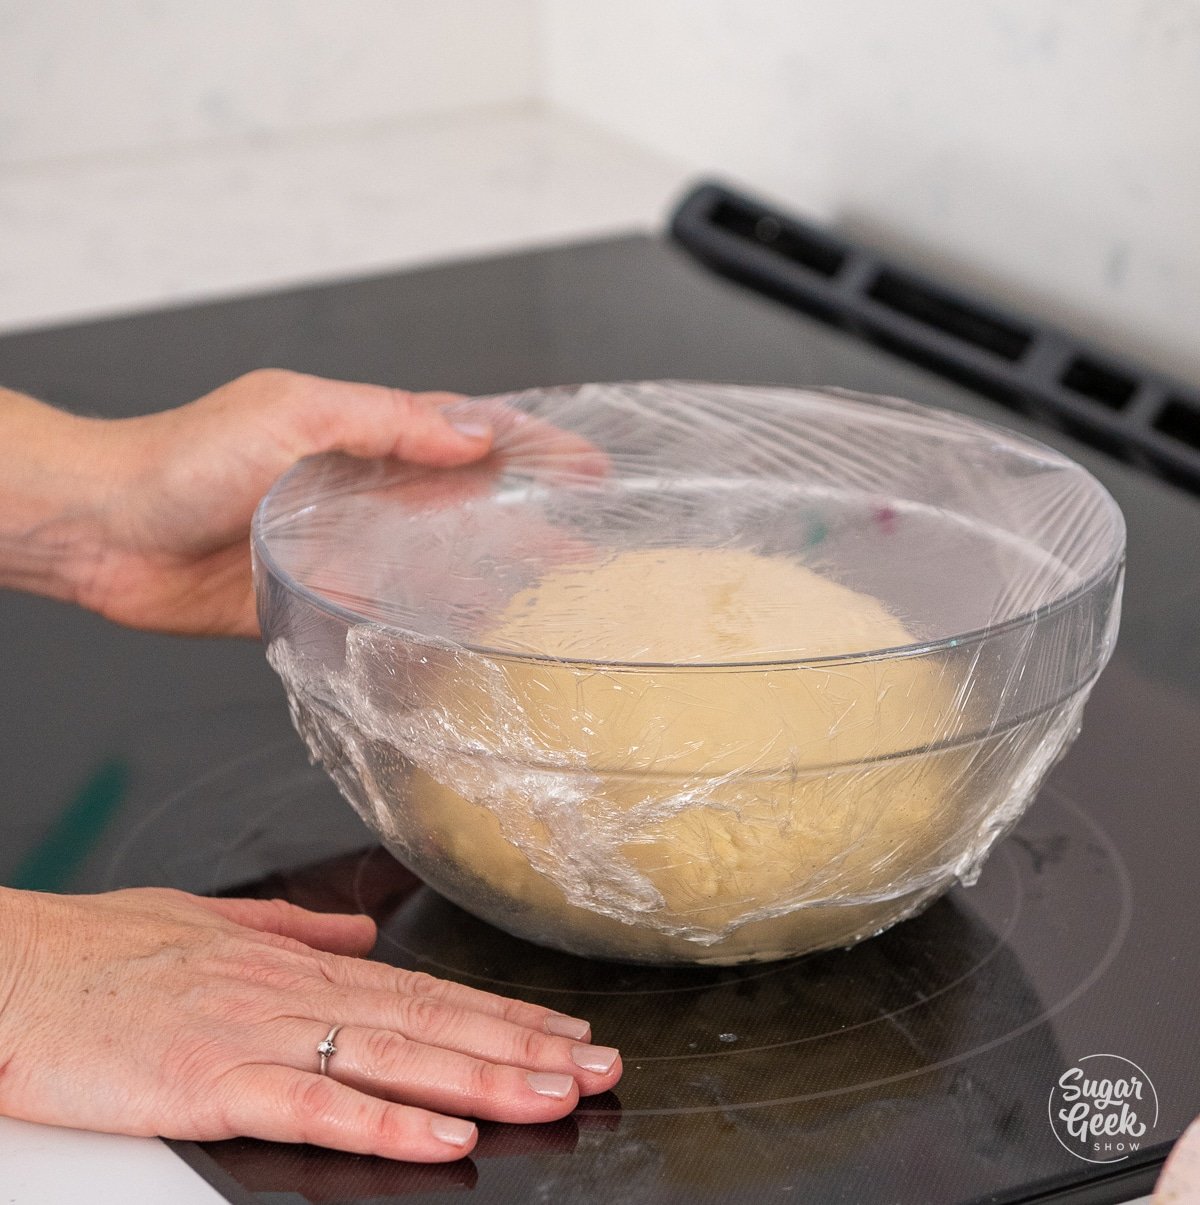 hands placing a glass bowl of dough on top of a cool stove